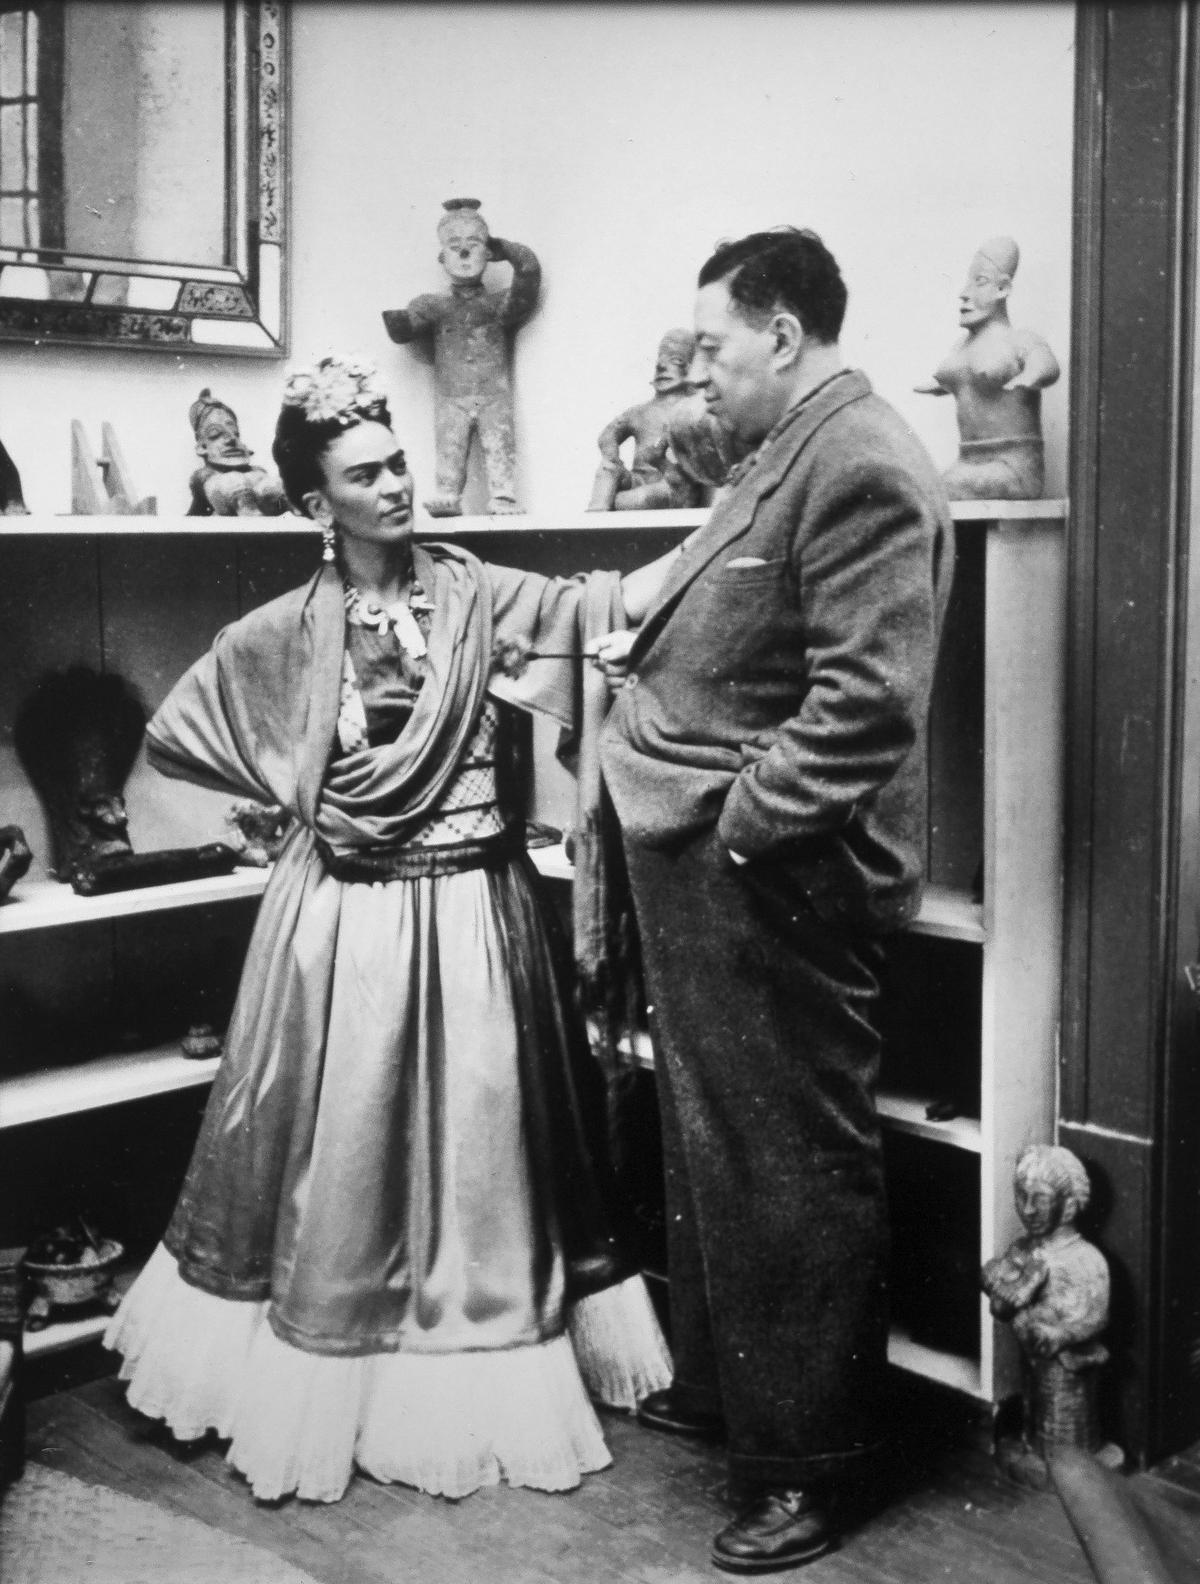 Frida Kahlo and Diego Rivera in Coyoacán, Mexico City, 1943